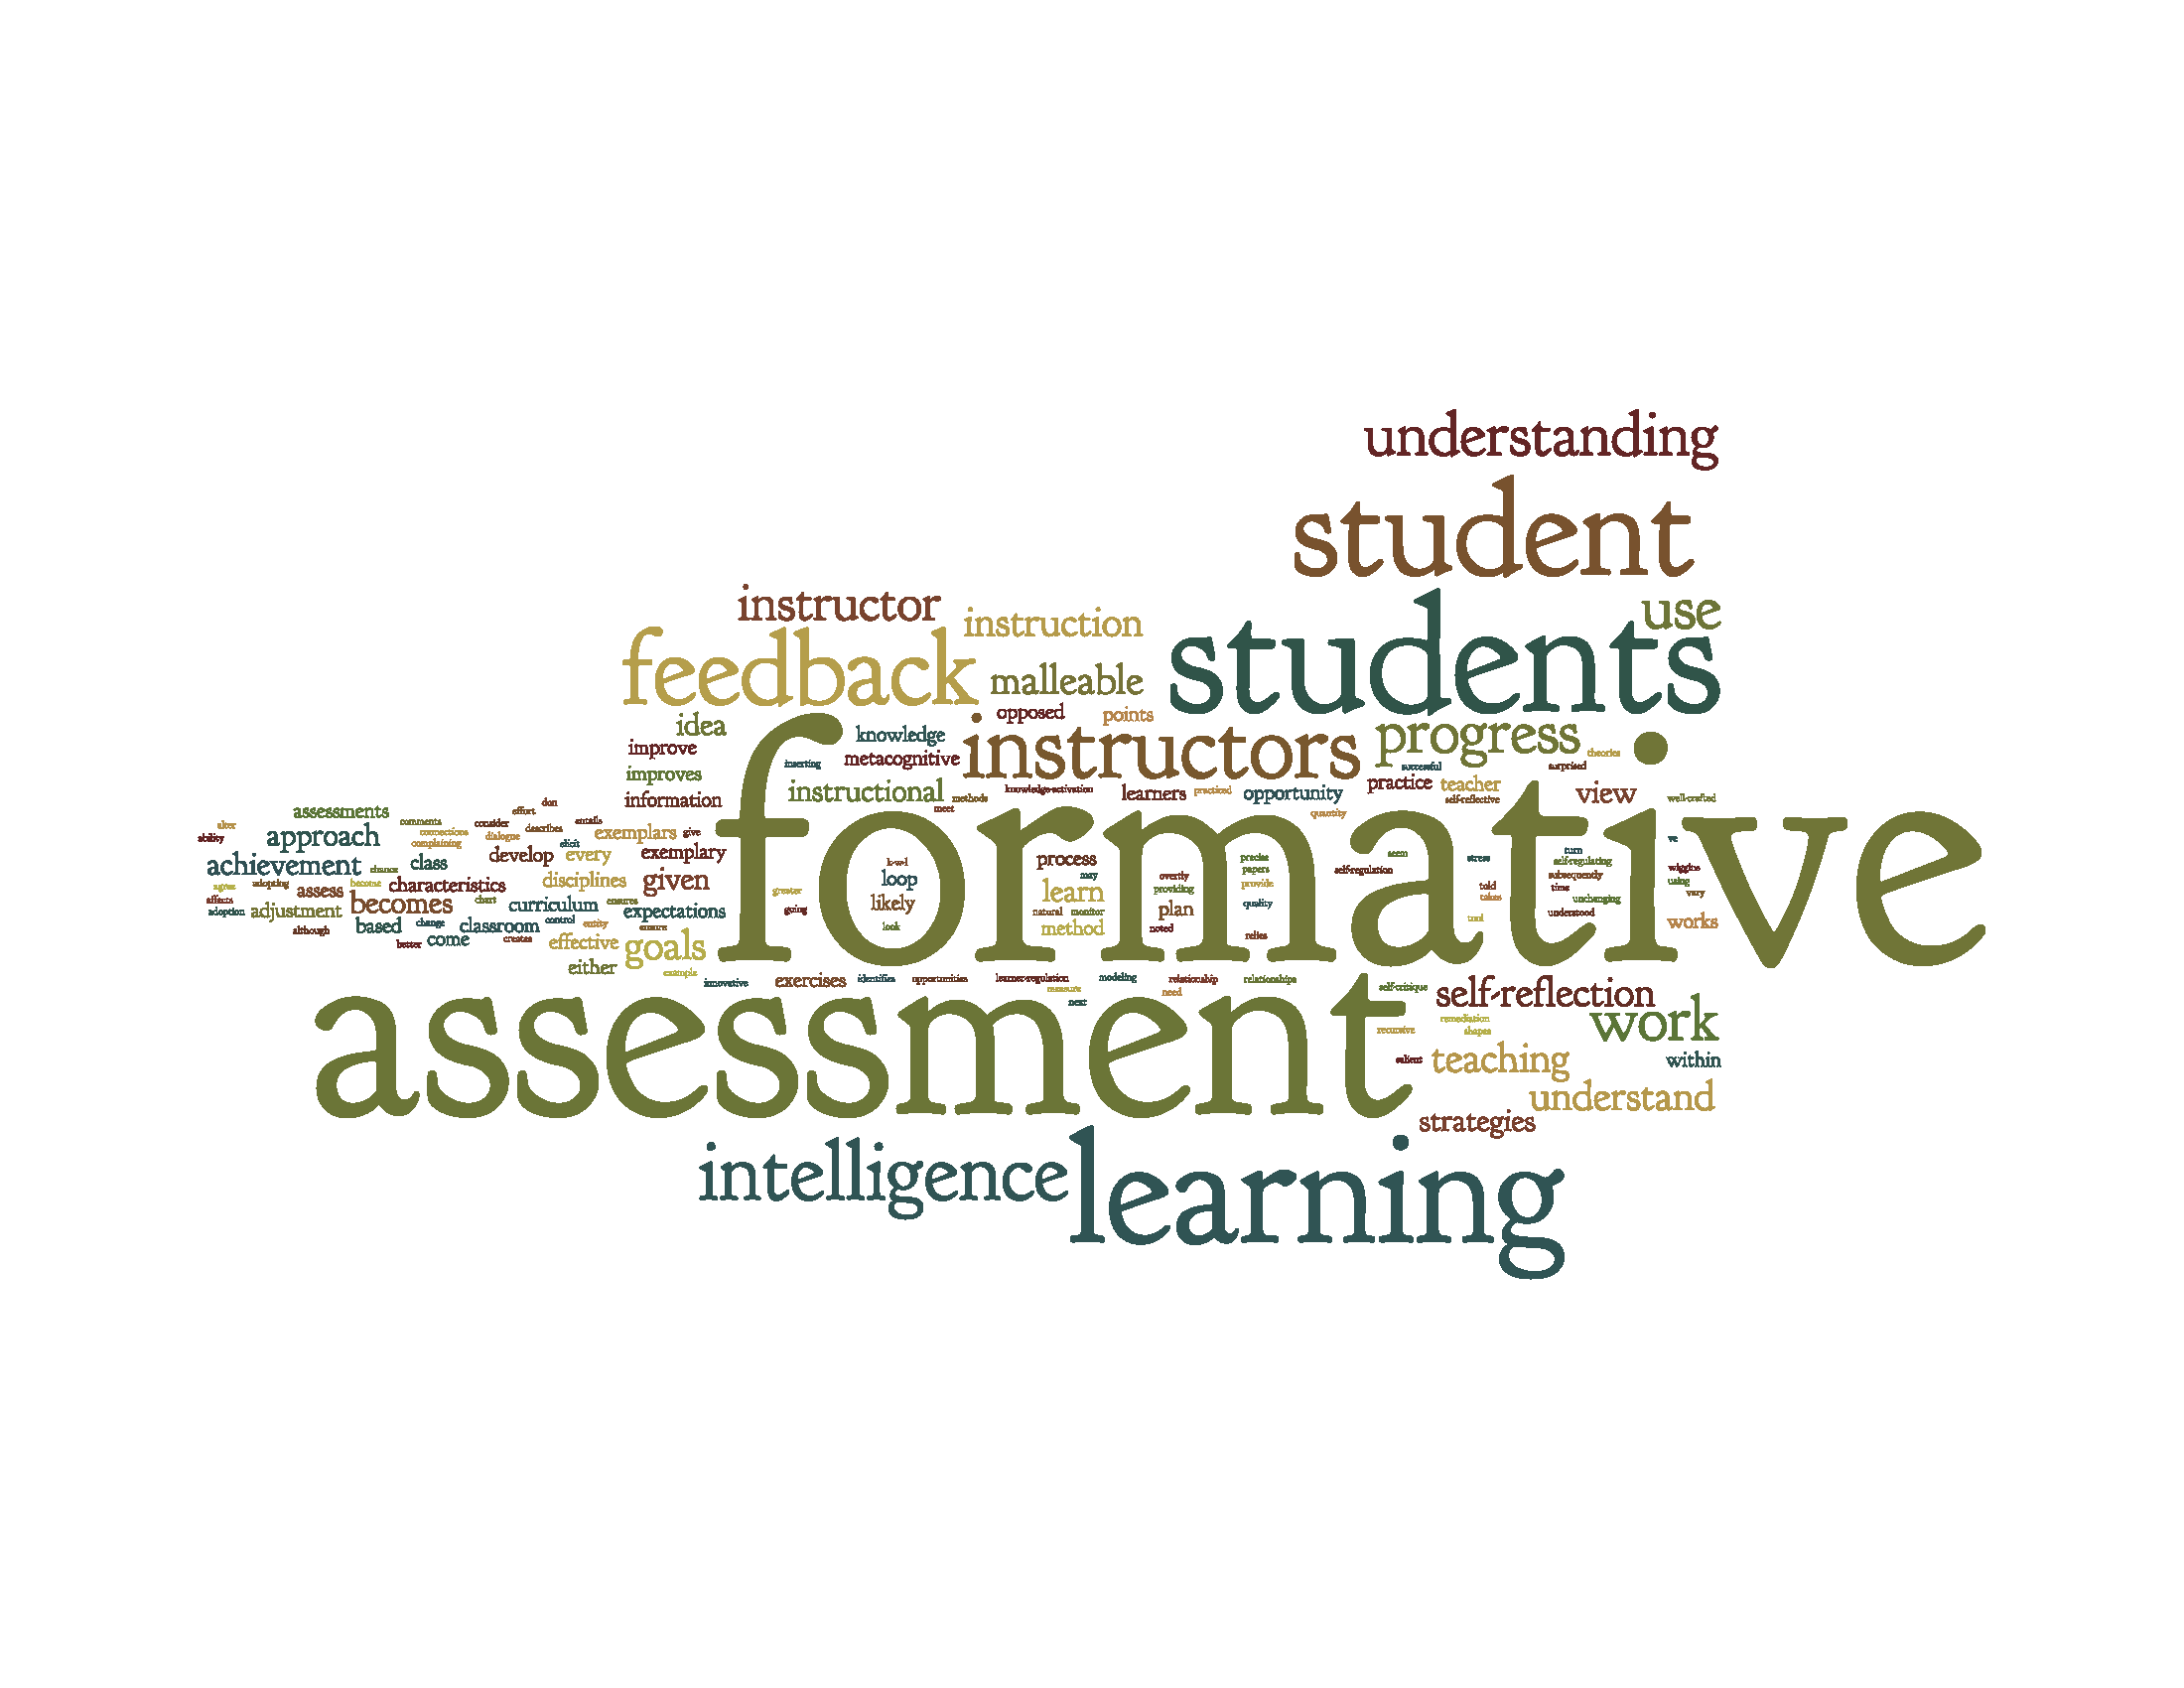 Word Cloud Created From The Text Of The Blog Post